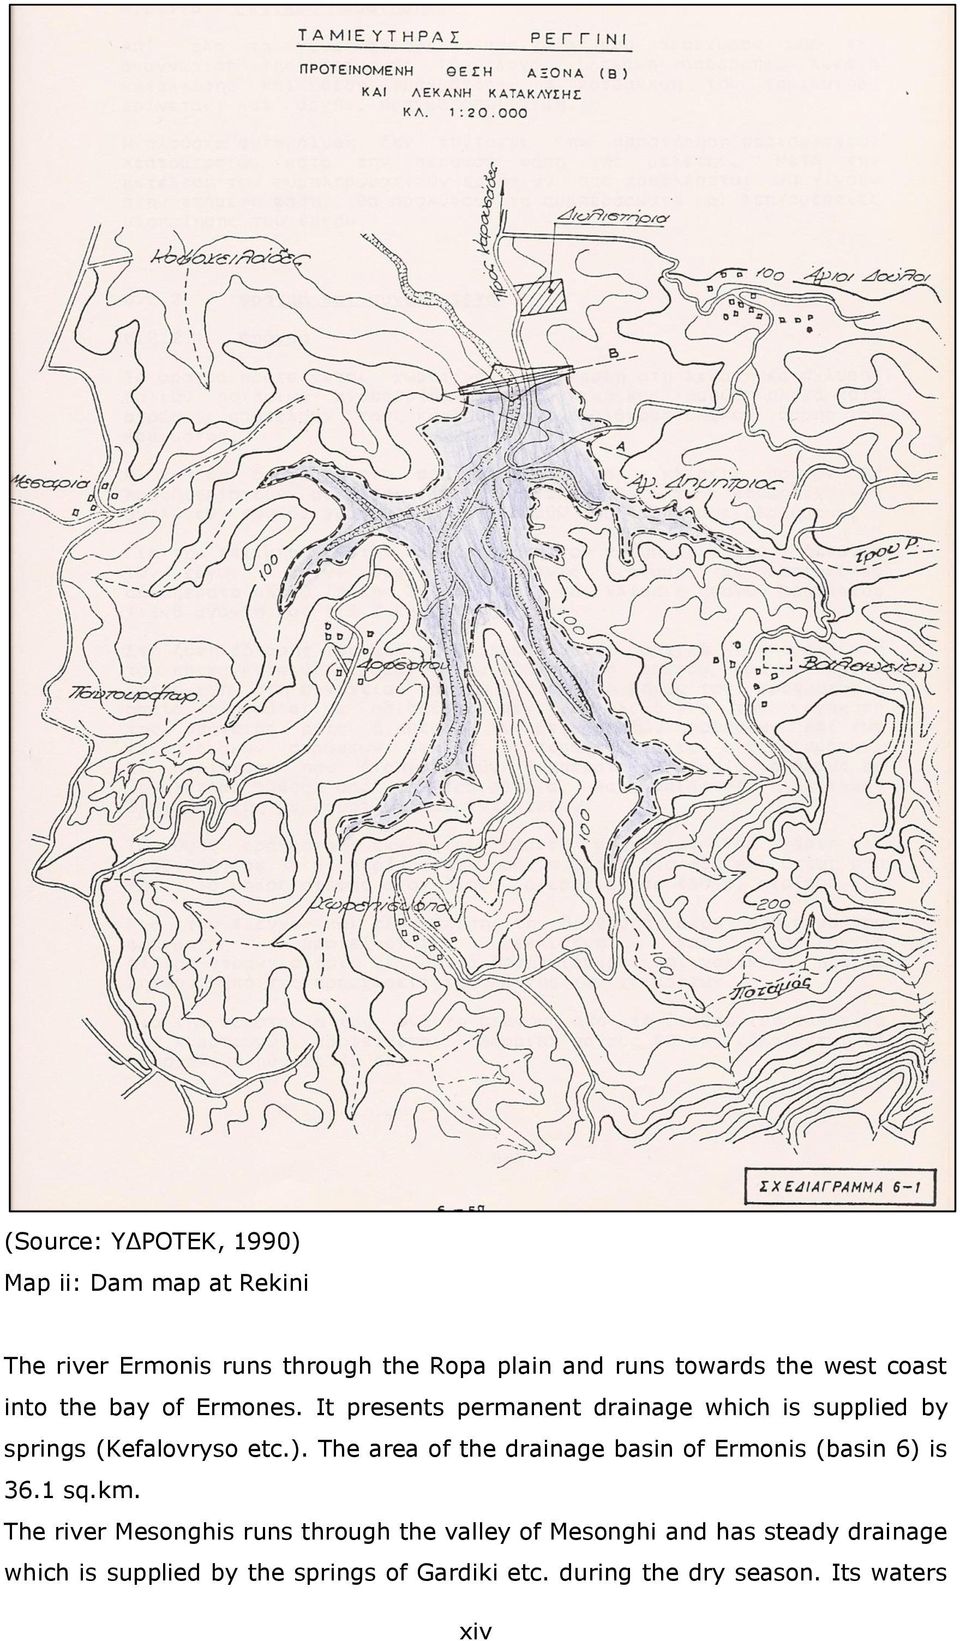 The area of the drainage basin of Ermonis (basin 6) is 36.1 sq.km.